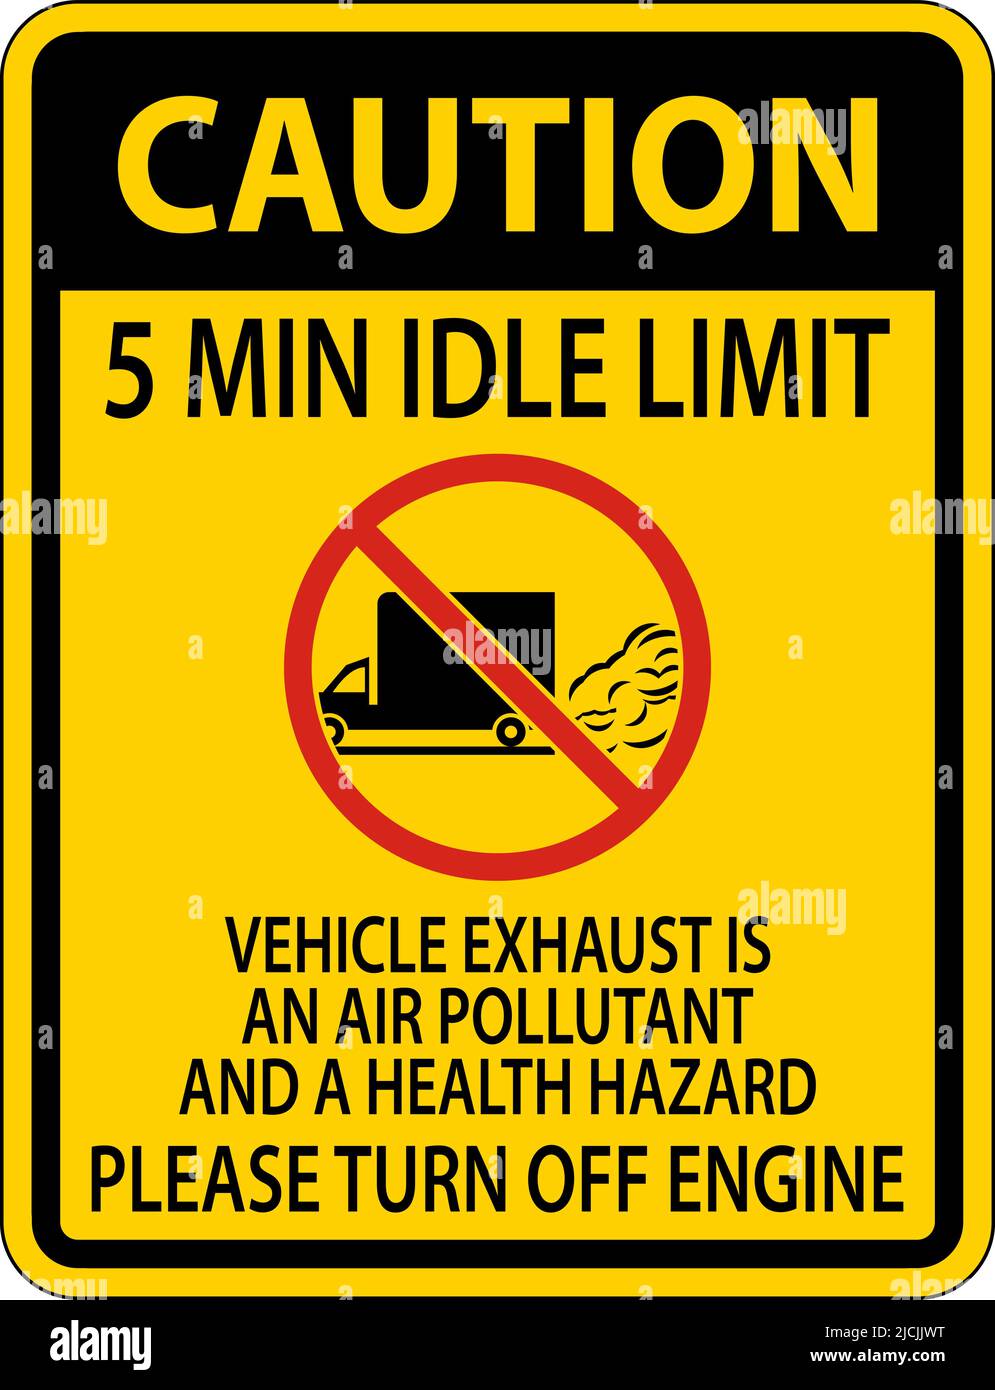 Caution 5 Min Idle Limit Sign On White Background Stock Vector